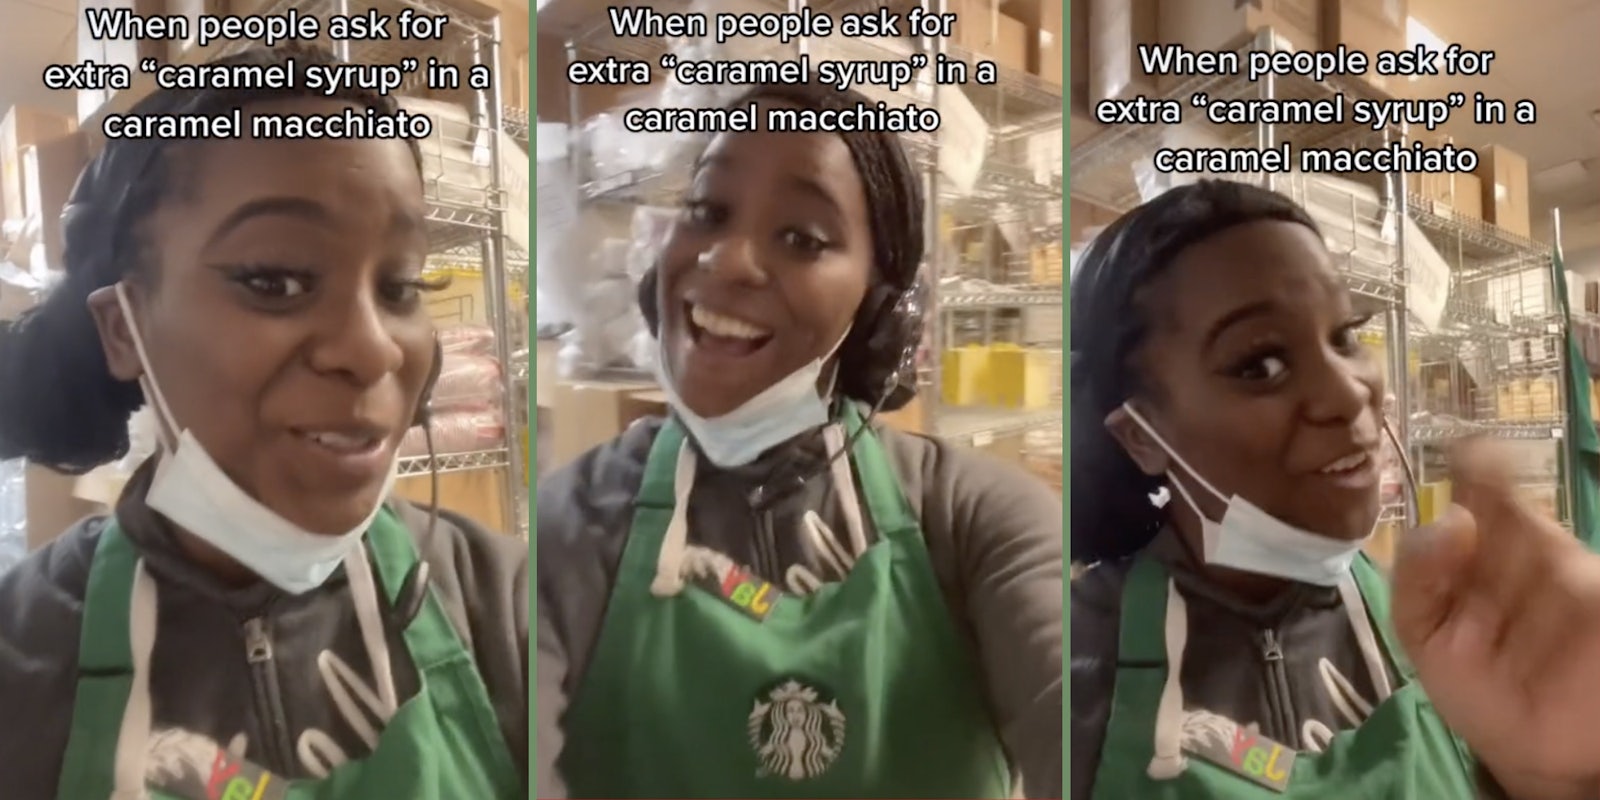 Starbucks worker's TikTok about customers who order caramel syrup in caramel macchiatos sparks debate. Employee sings along to audio in green Starbucks apron.